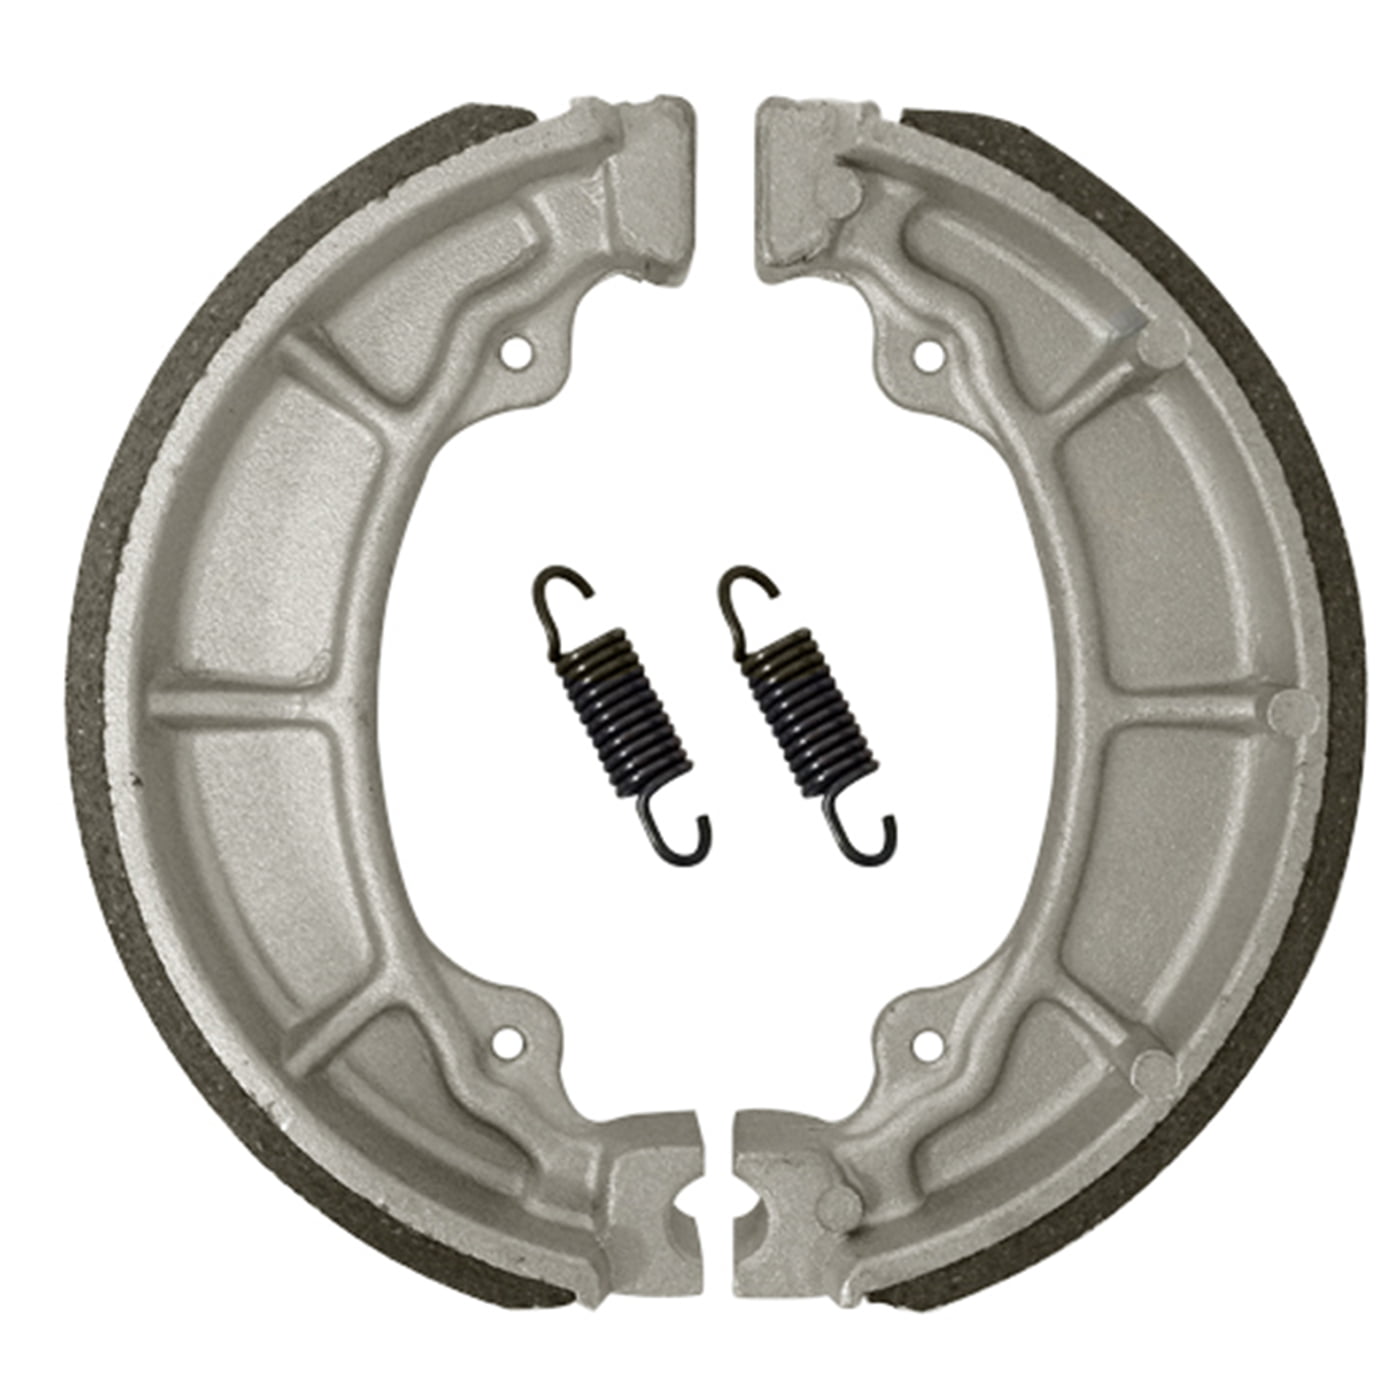 Factory Spec FS-127 Rear Brake Shoes 2002-2005 Arctic Cat 90 Utility & 2004-2005 Arctic Cat 50 Utility Youth 